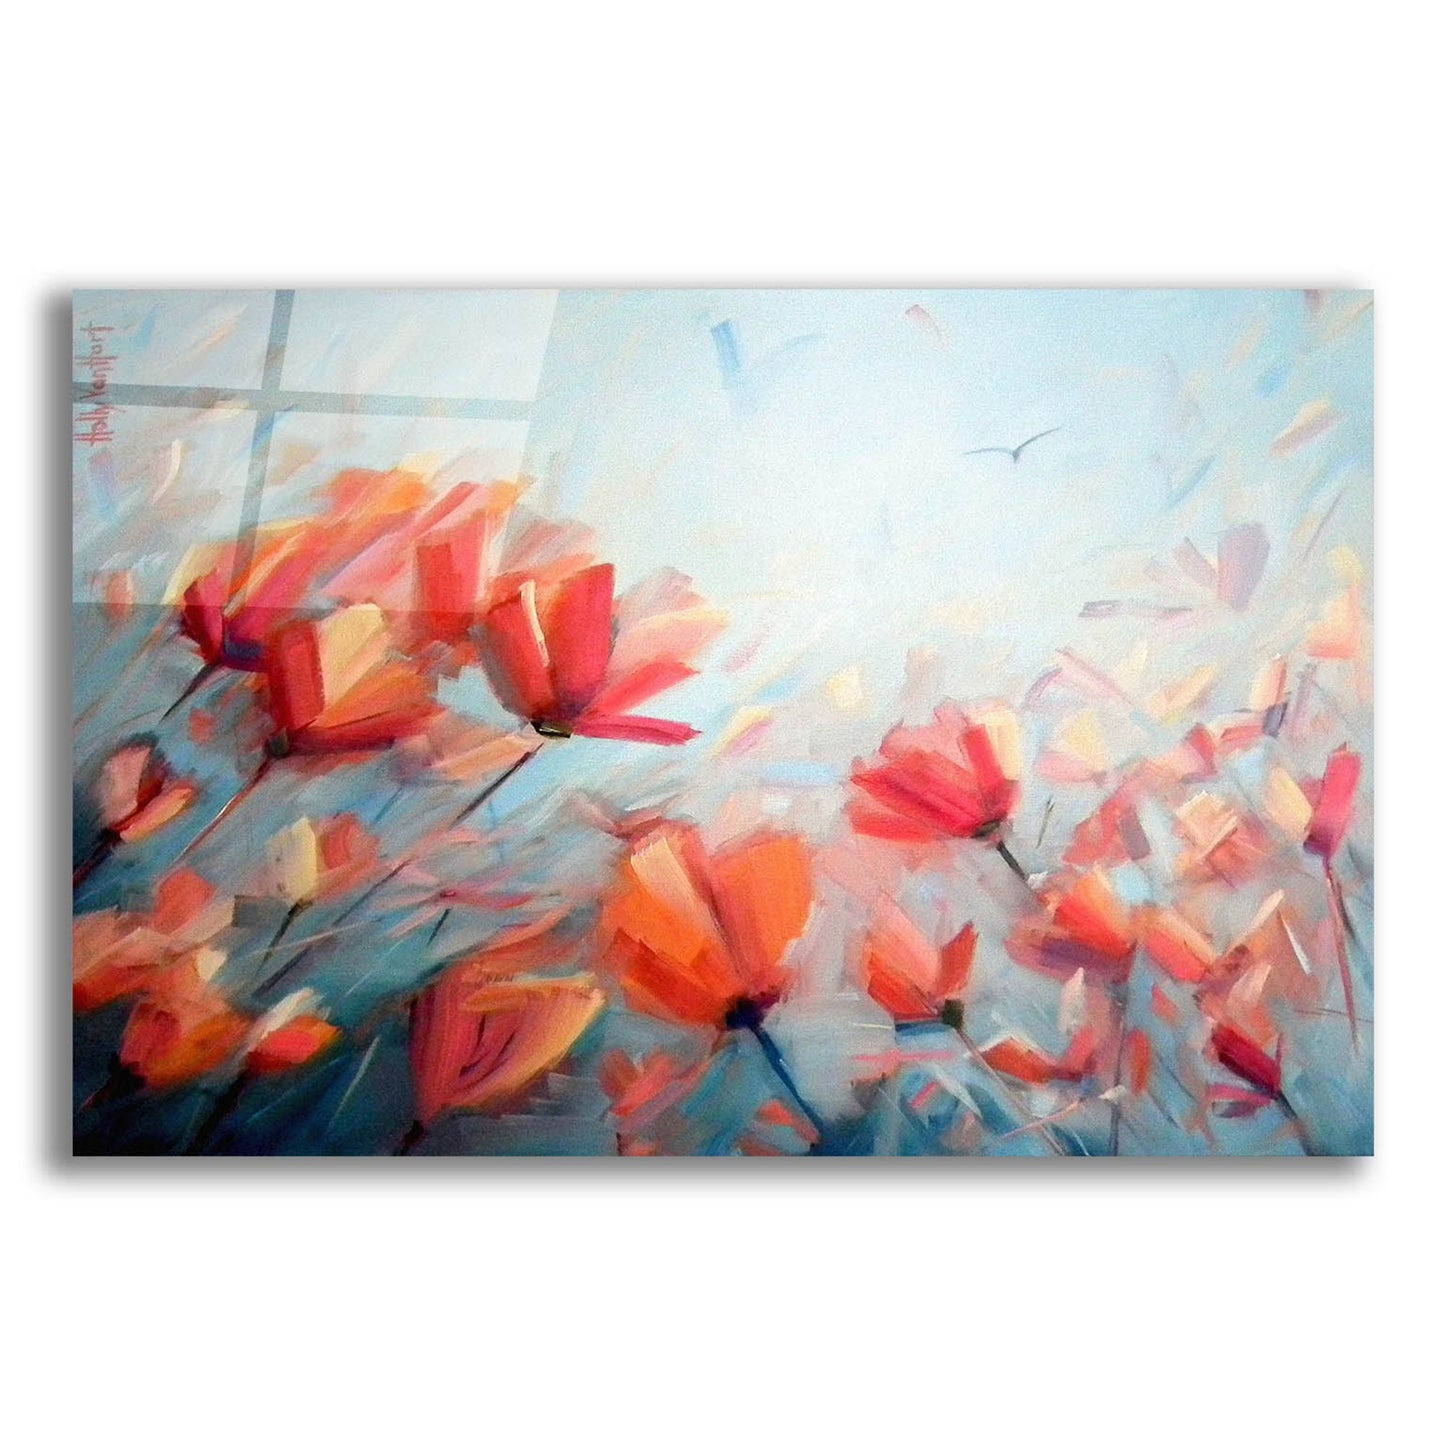 Epic Art 'Dreaming In Full Color' by Holly Van Hart, Acrylic Glass Wall Art,24x16